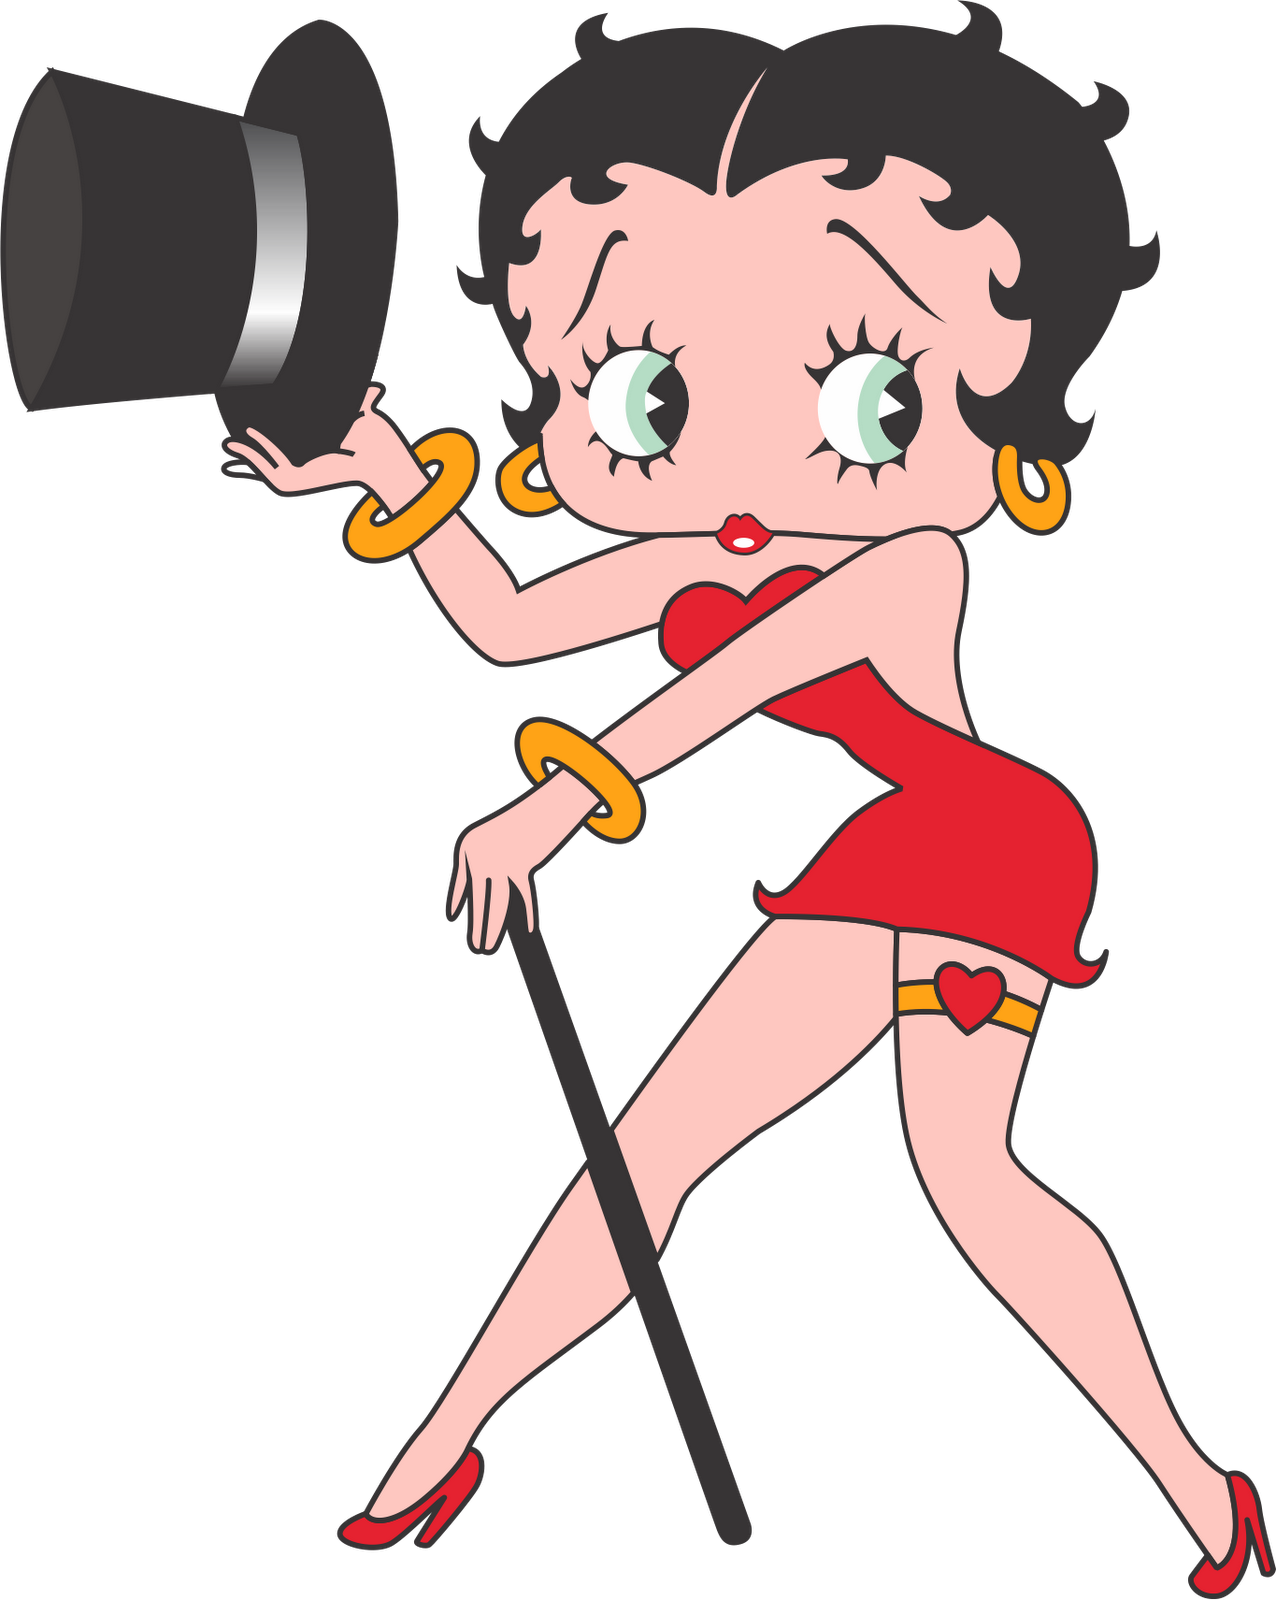 Free Download Free Download Dibujos Animados Betty Boop Hd Wallpaper Car Pictures [1276x1600